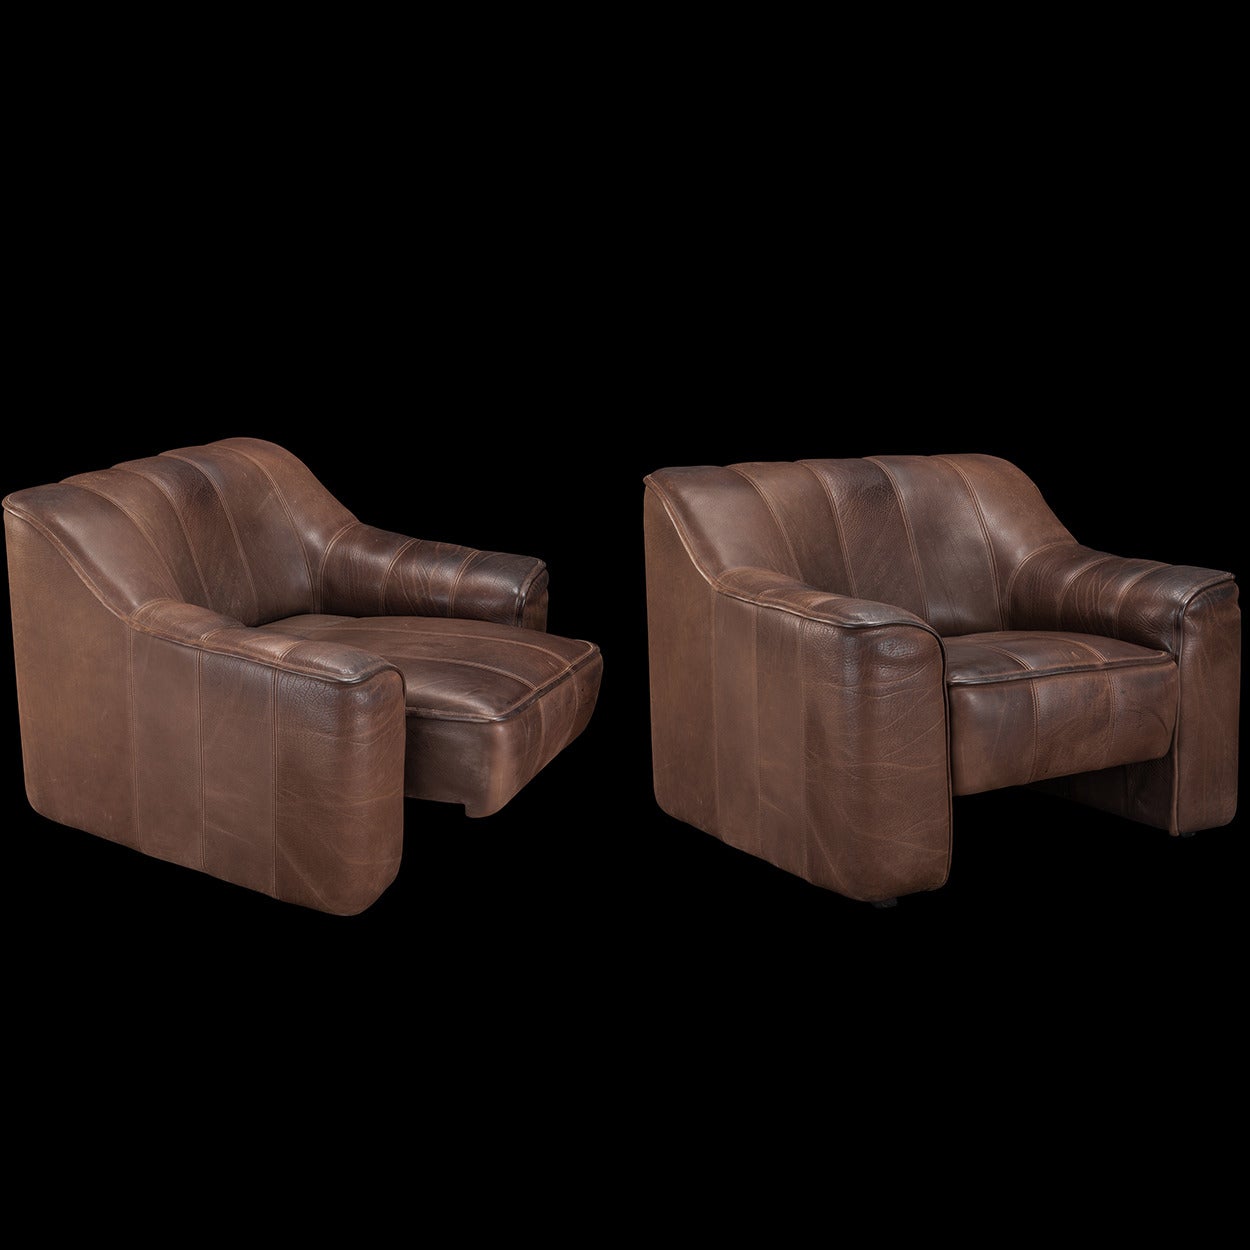 Model DS-44 club chair, with original buffalo leather and solid wood frame.

Manufactured by de Sede in Switzerland circa 1970